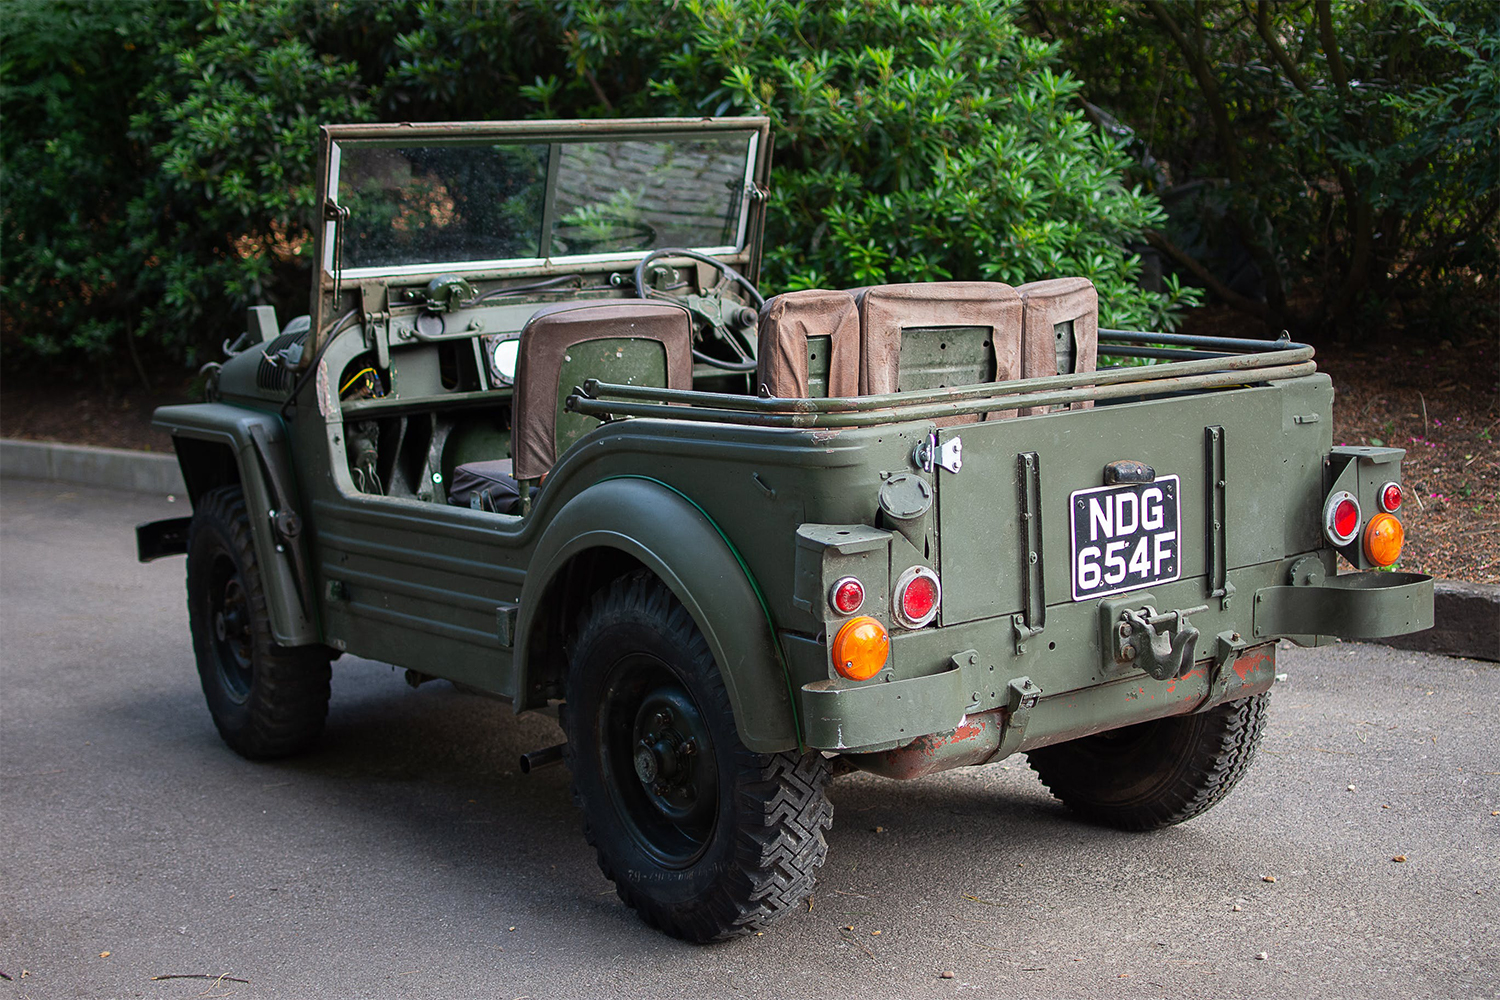 The rear end of a 1952 Austin Champ, a British off-road 4x4 built to outperform the American jeeps of World War II. This model was auctioned off in August 2021.